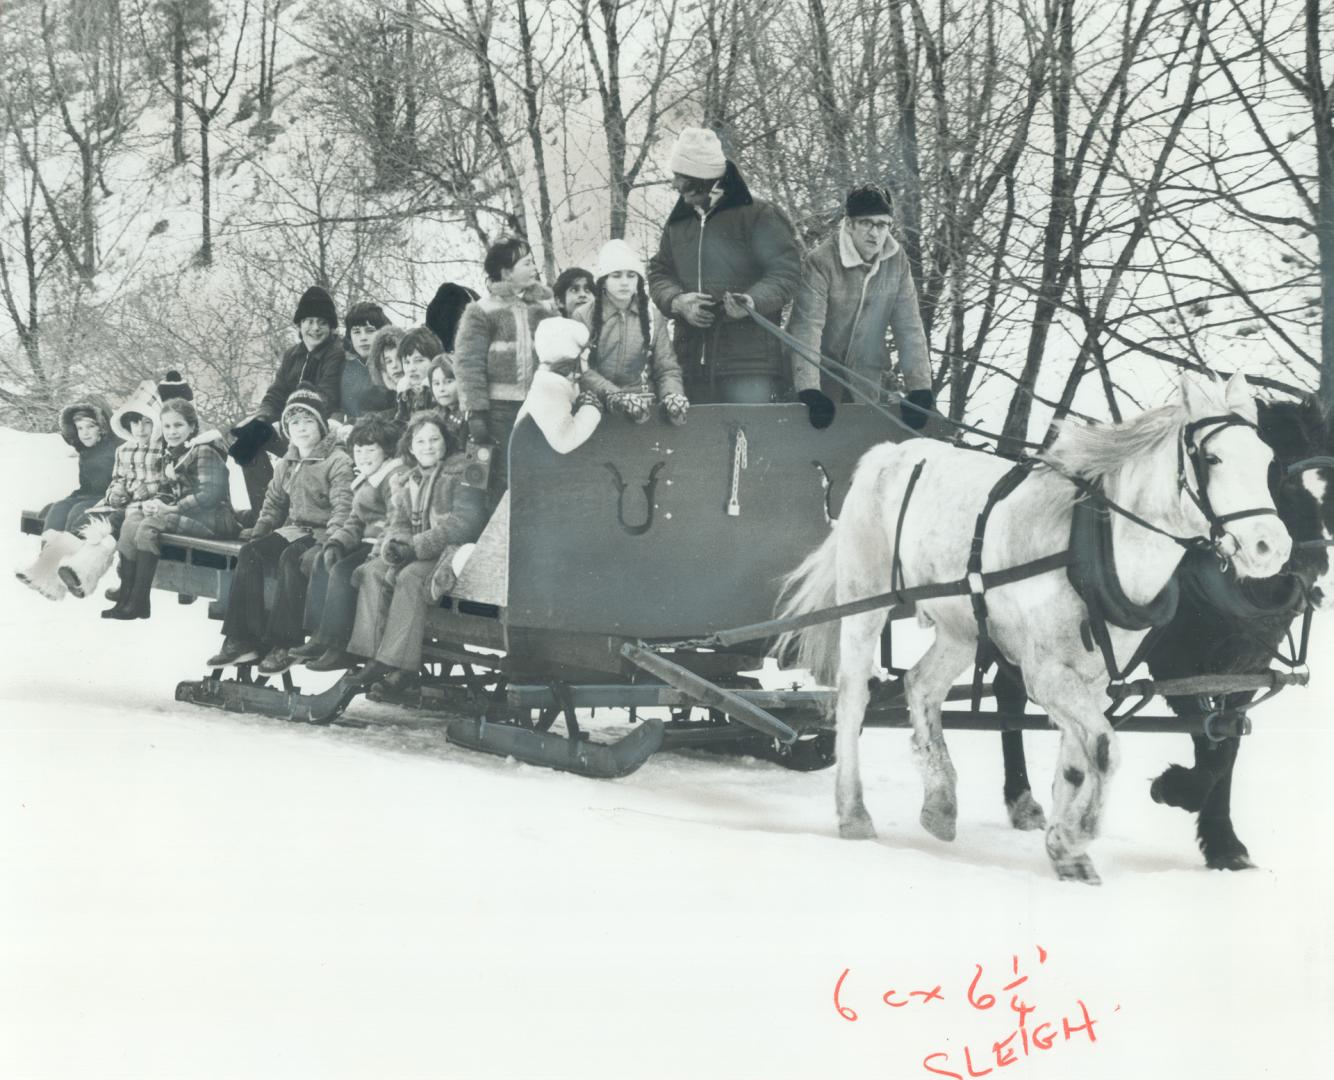 This is a two-horse open sleigh, An old-fashioned treat these snowy winter days is the sleigh rides offered every weekend at Scarborough's Thomson Mem(...)